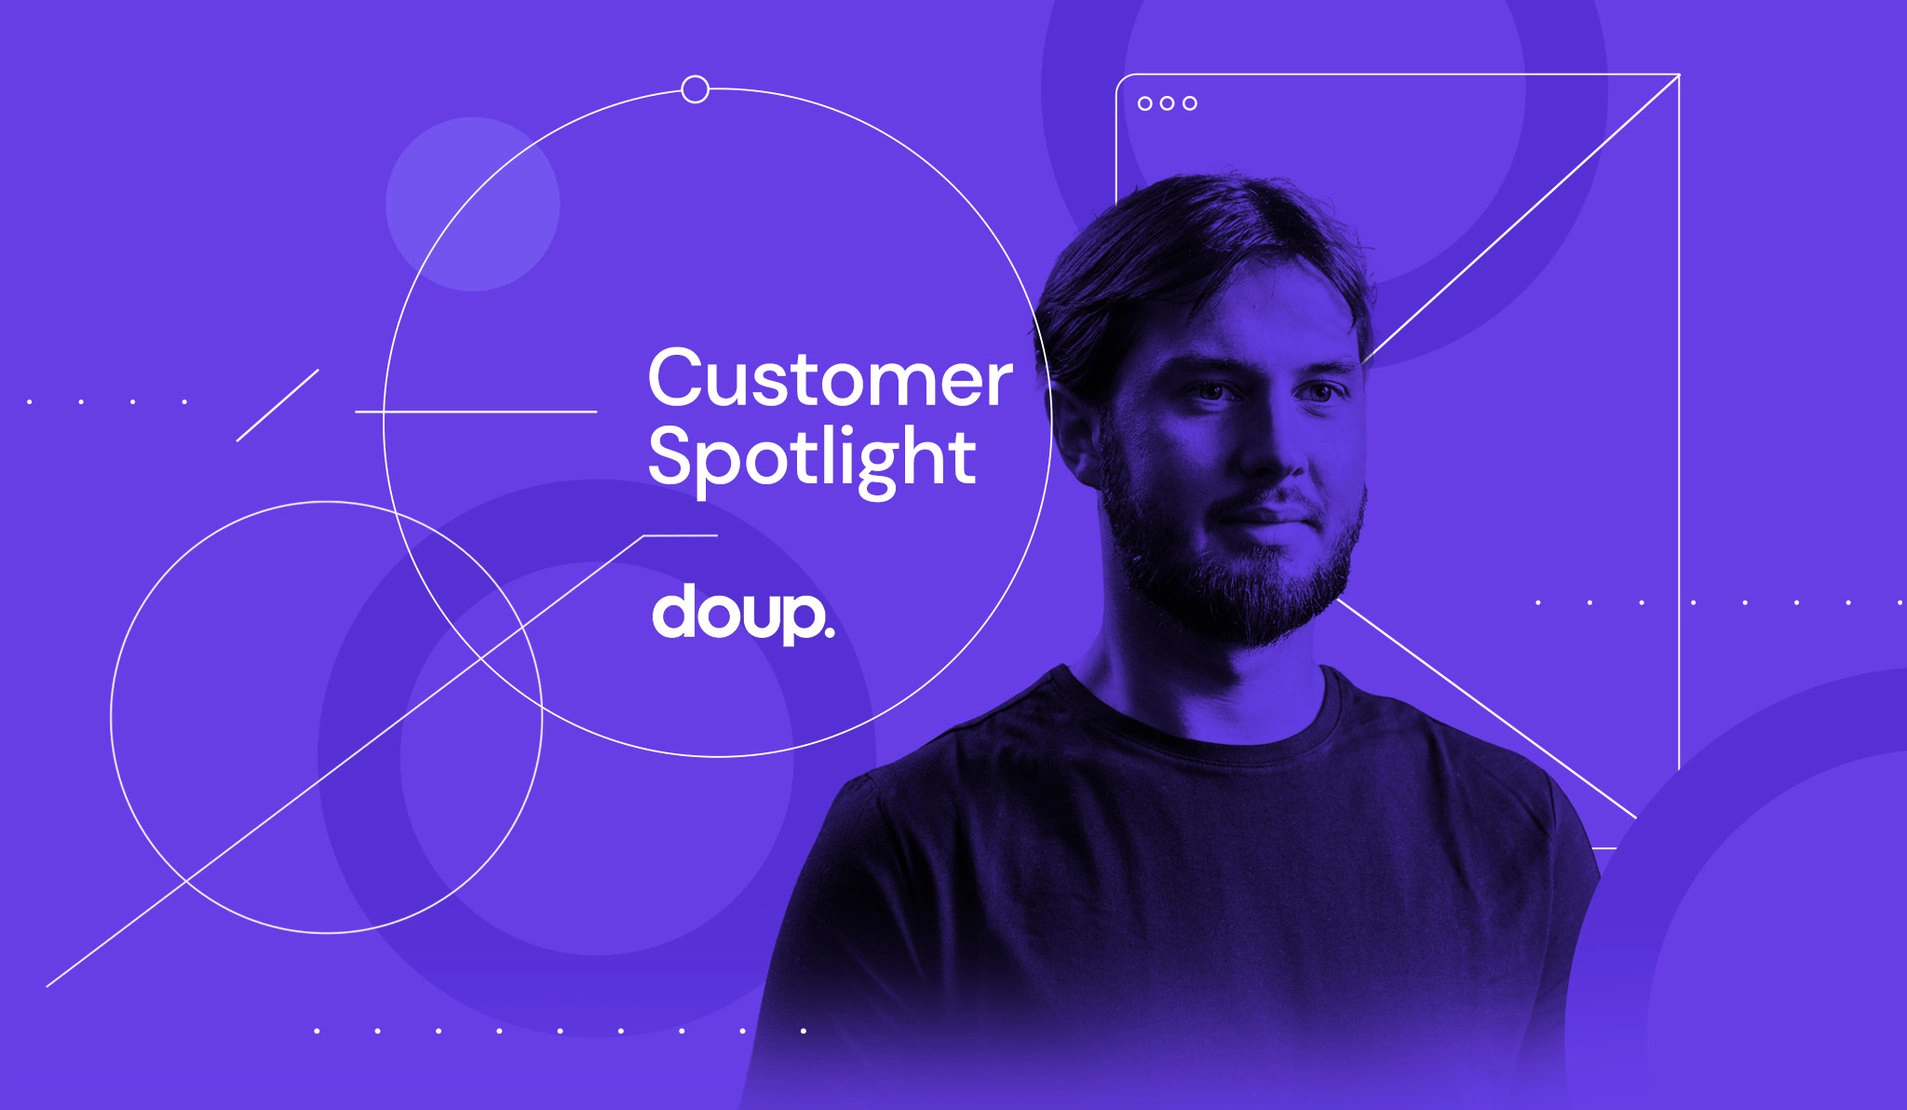 doup. Digital Business Cards: Striking the Balance Between Security and Innovation